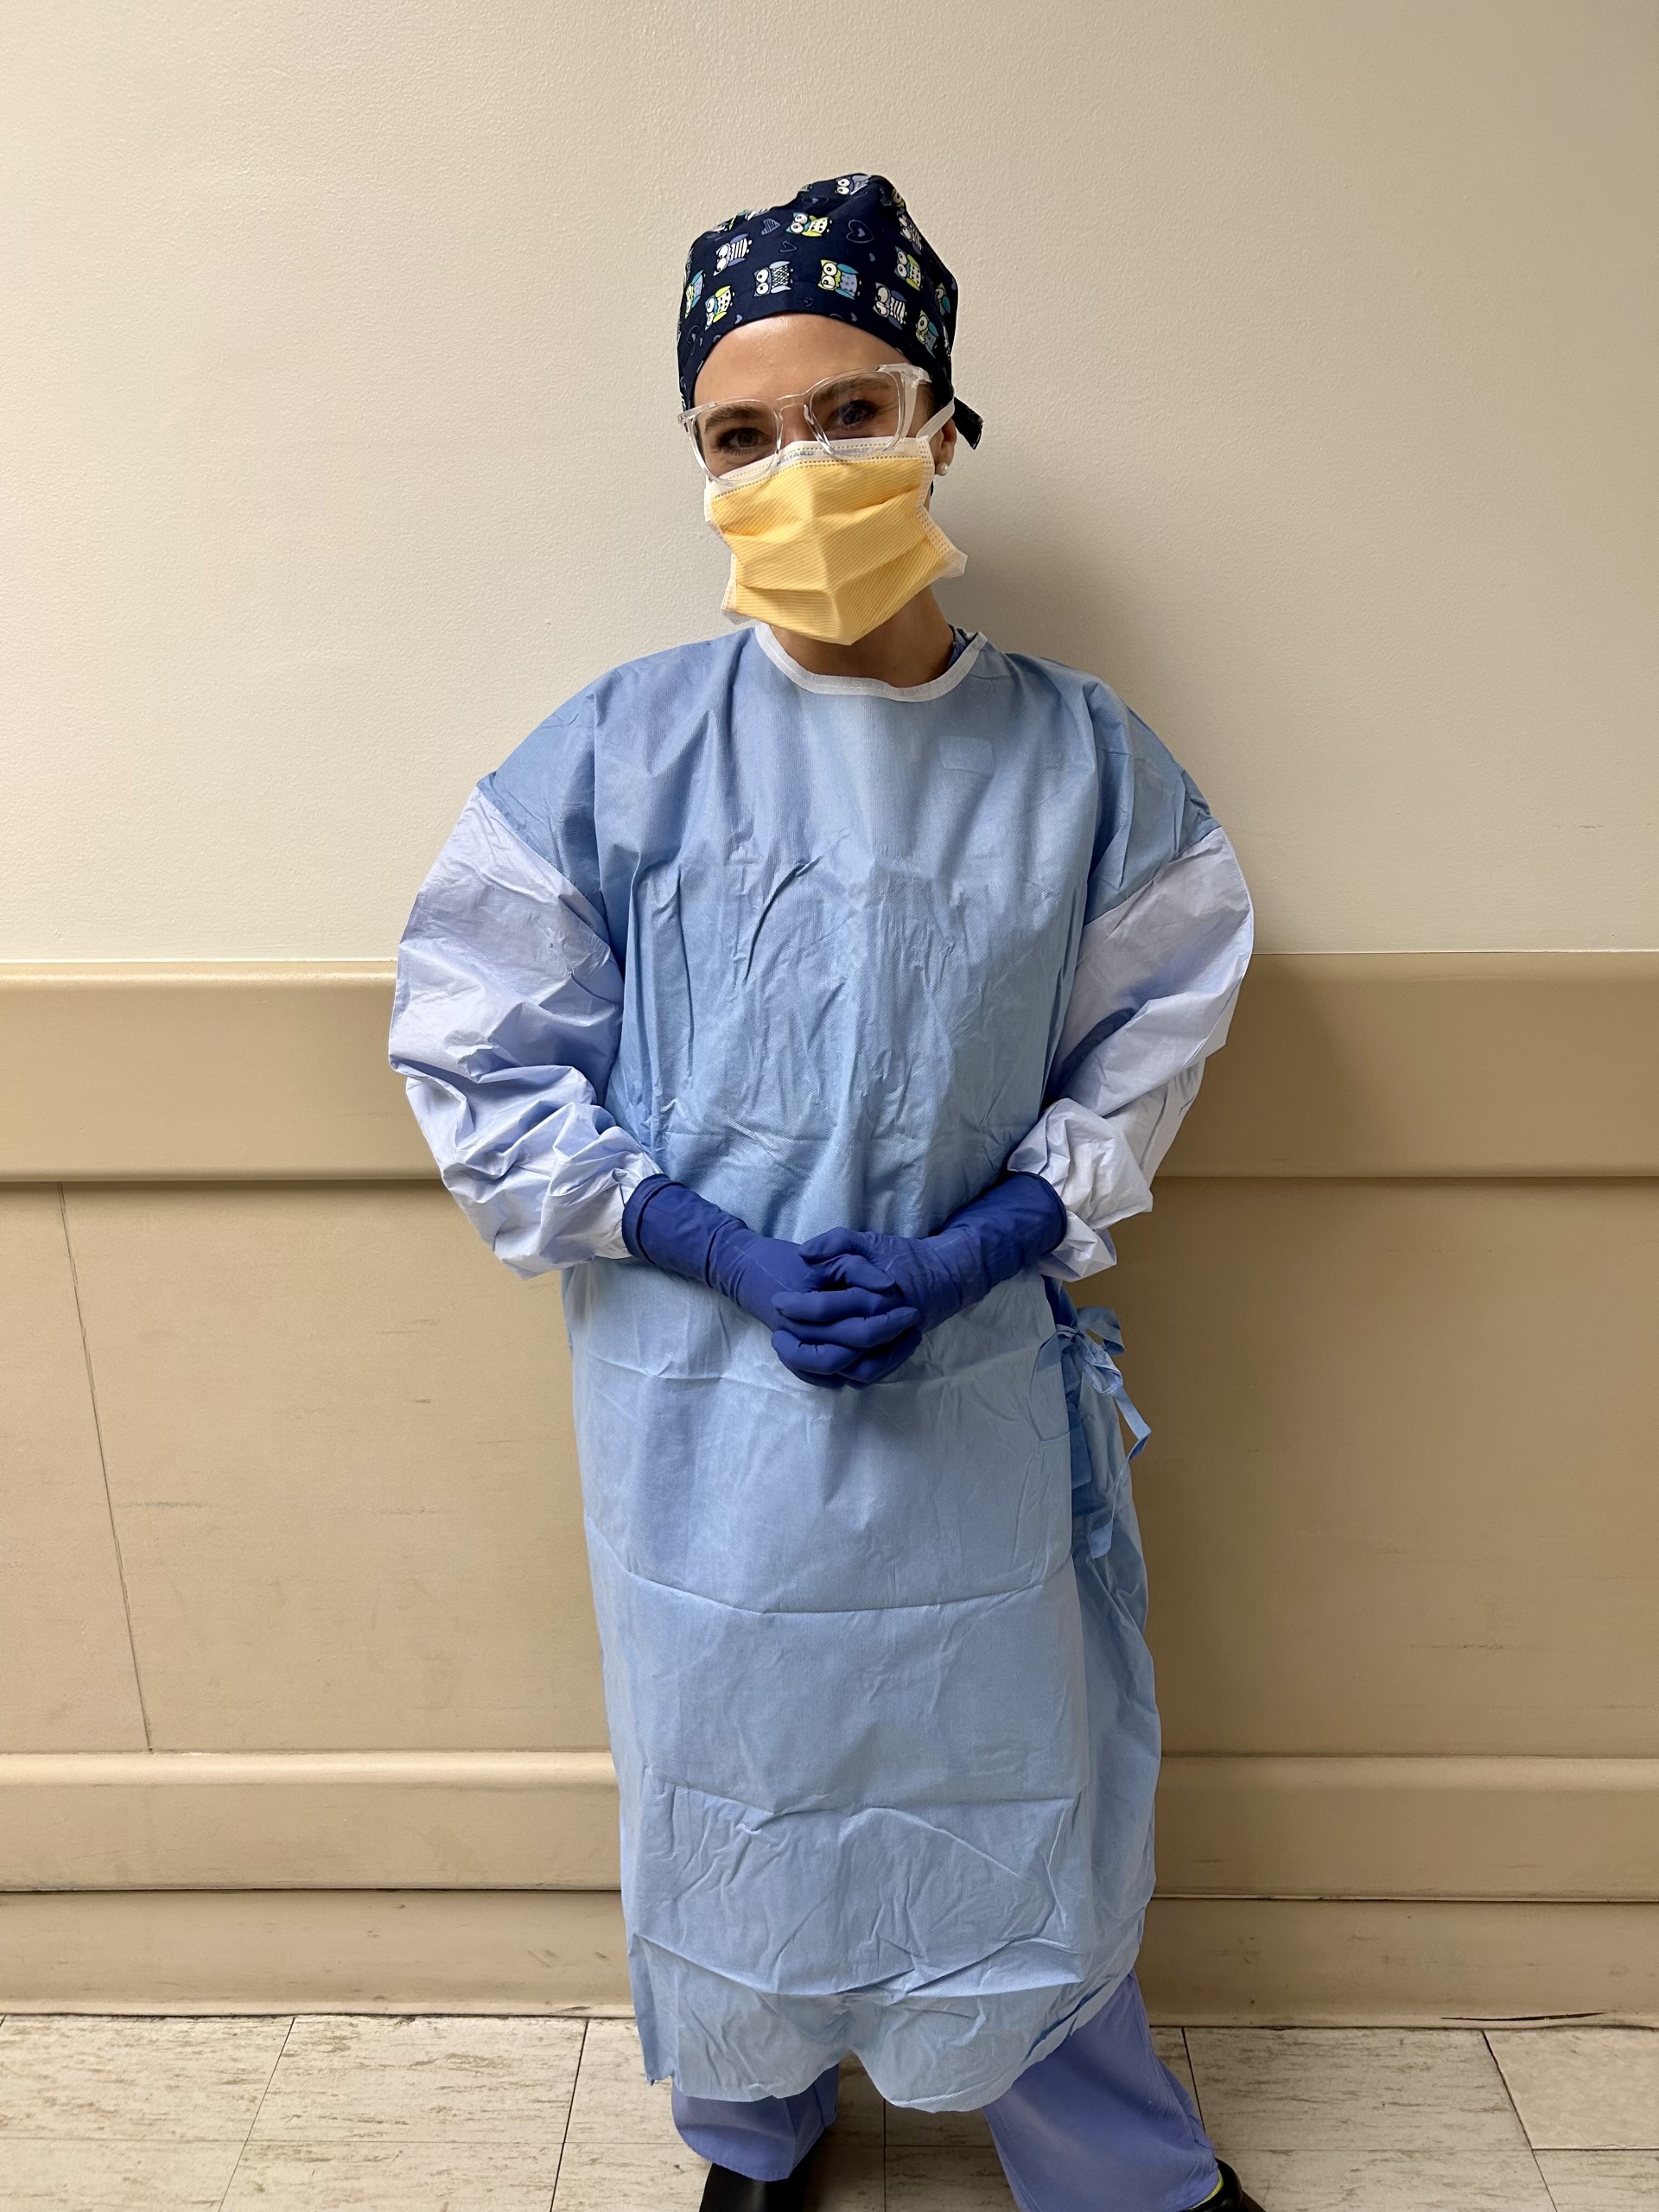 BSN Student Molly Yeo in surgical garb